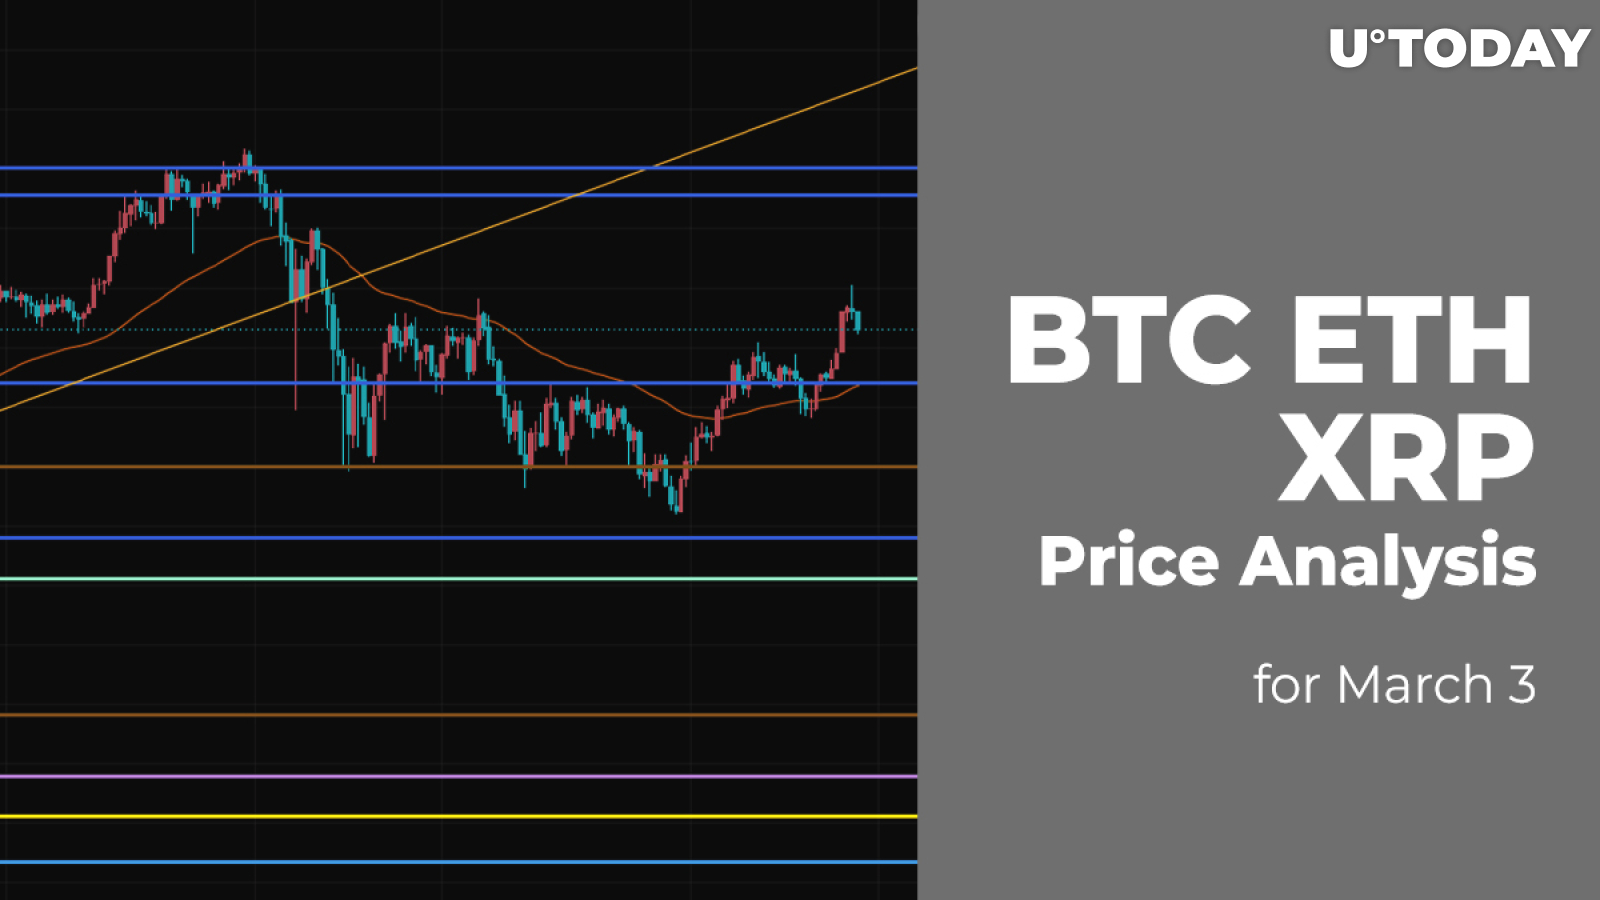 BTC, ETH and XRP Price Analysis for March 3